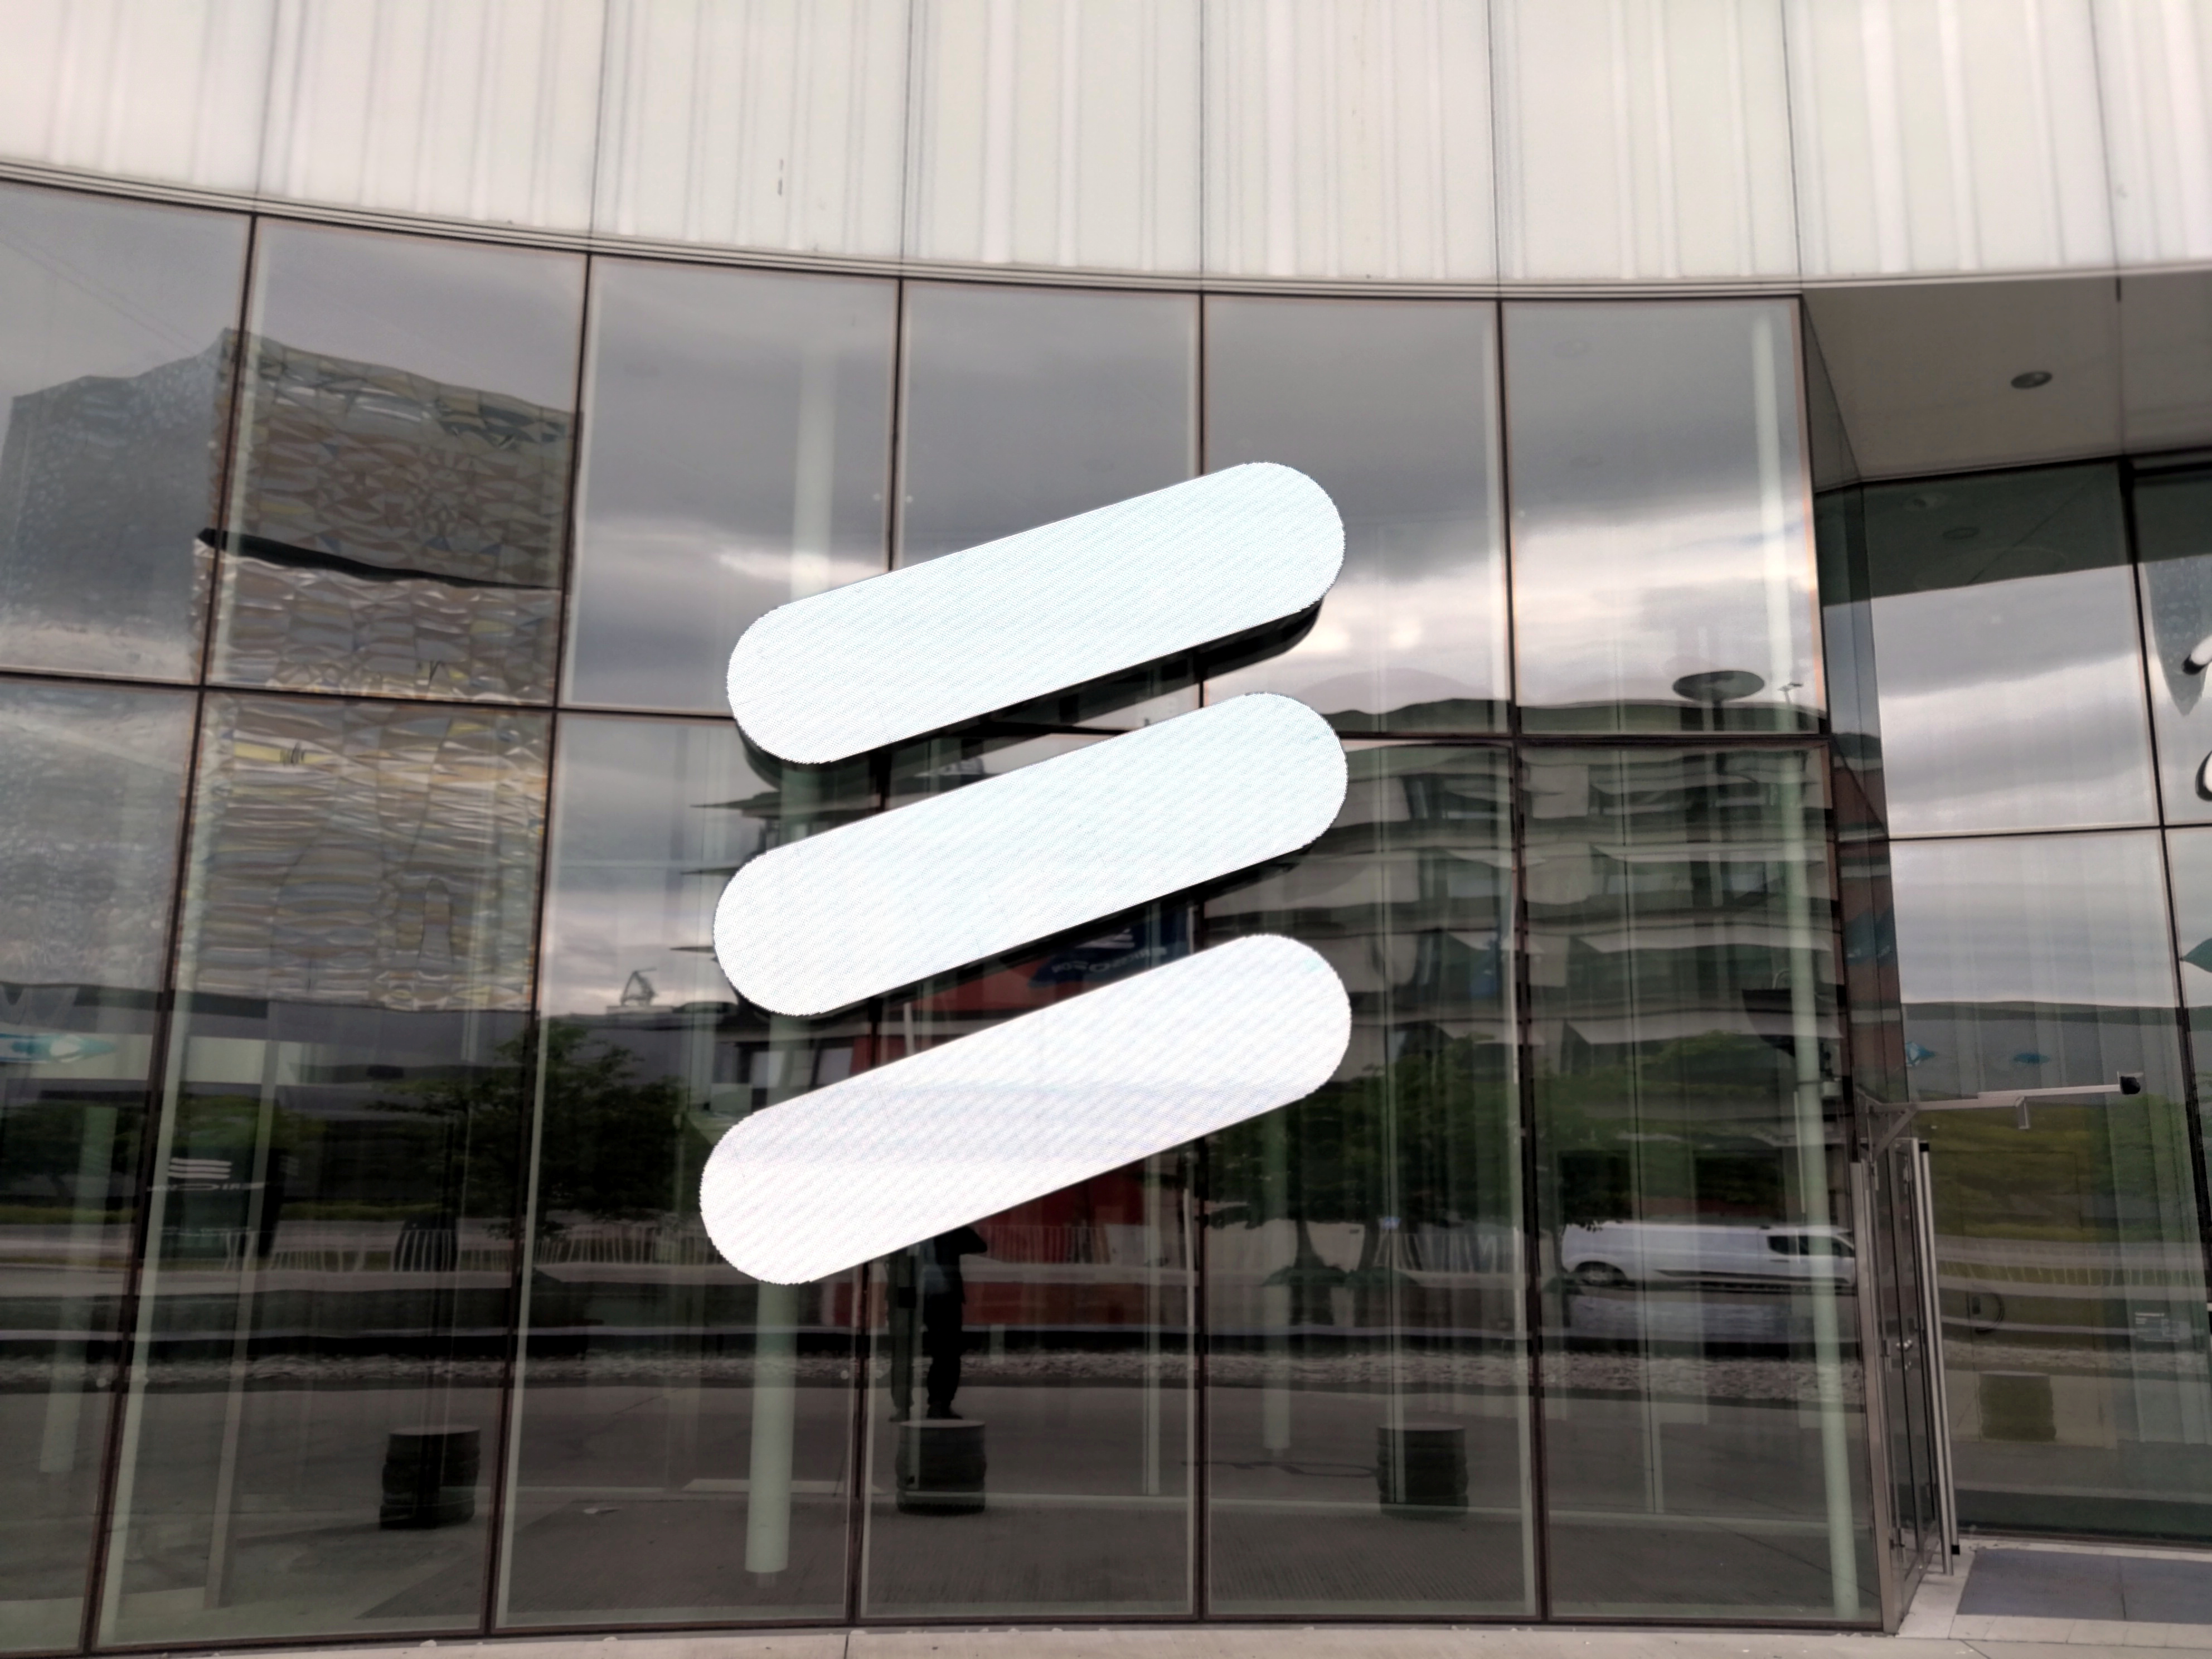 The Ericsson logo is seen at the Ericsson's headquarters in Stockholm